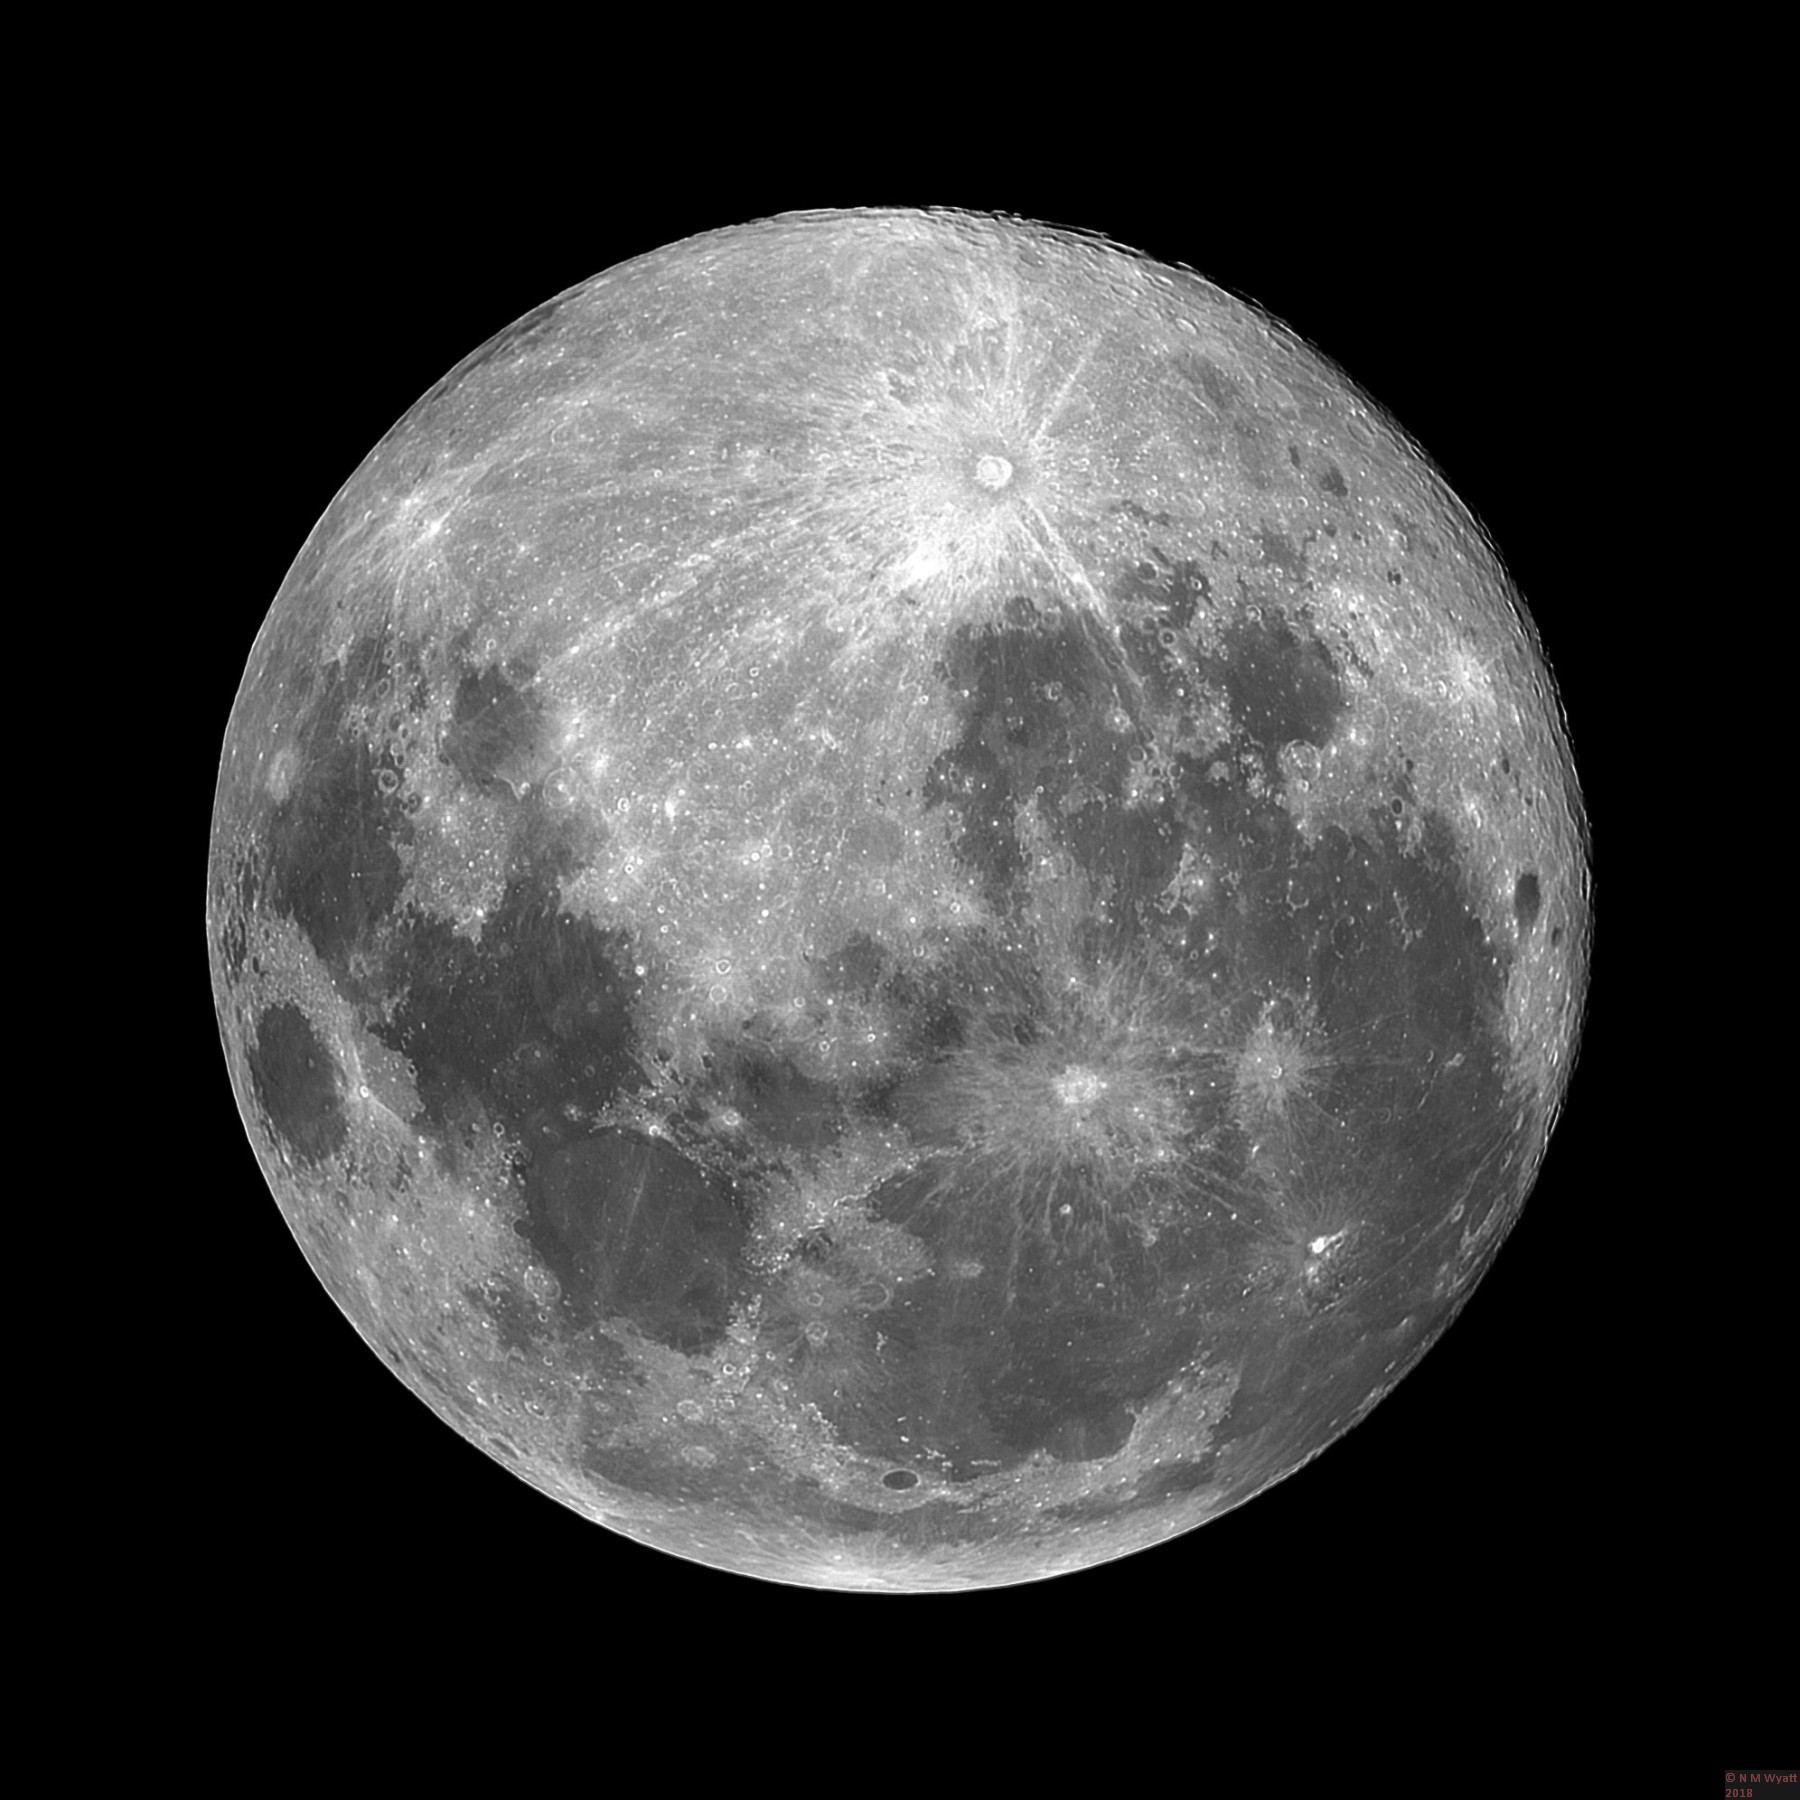 A sharp picture of the full moon